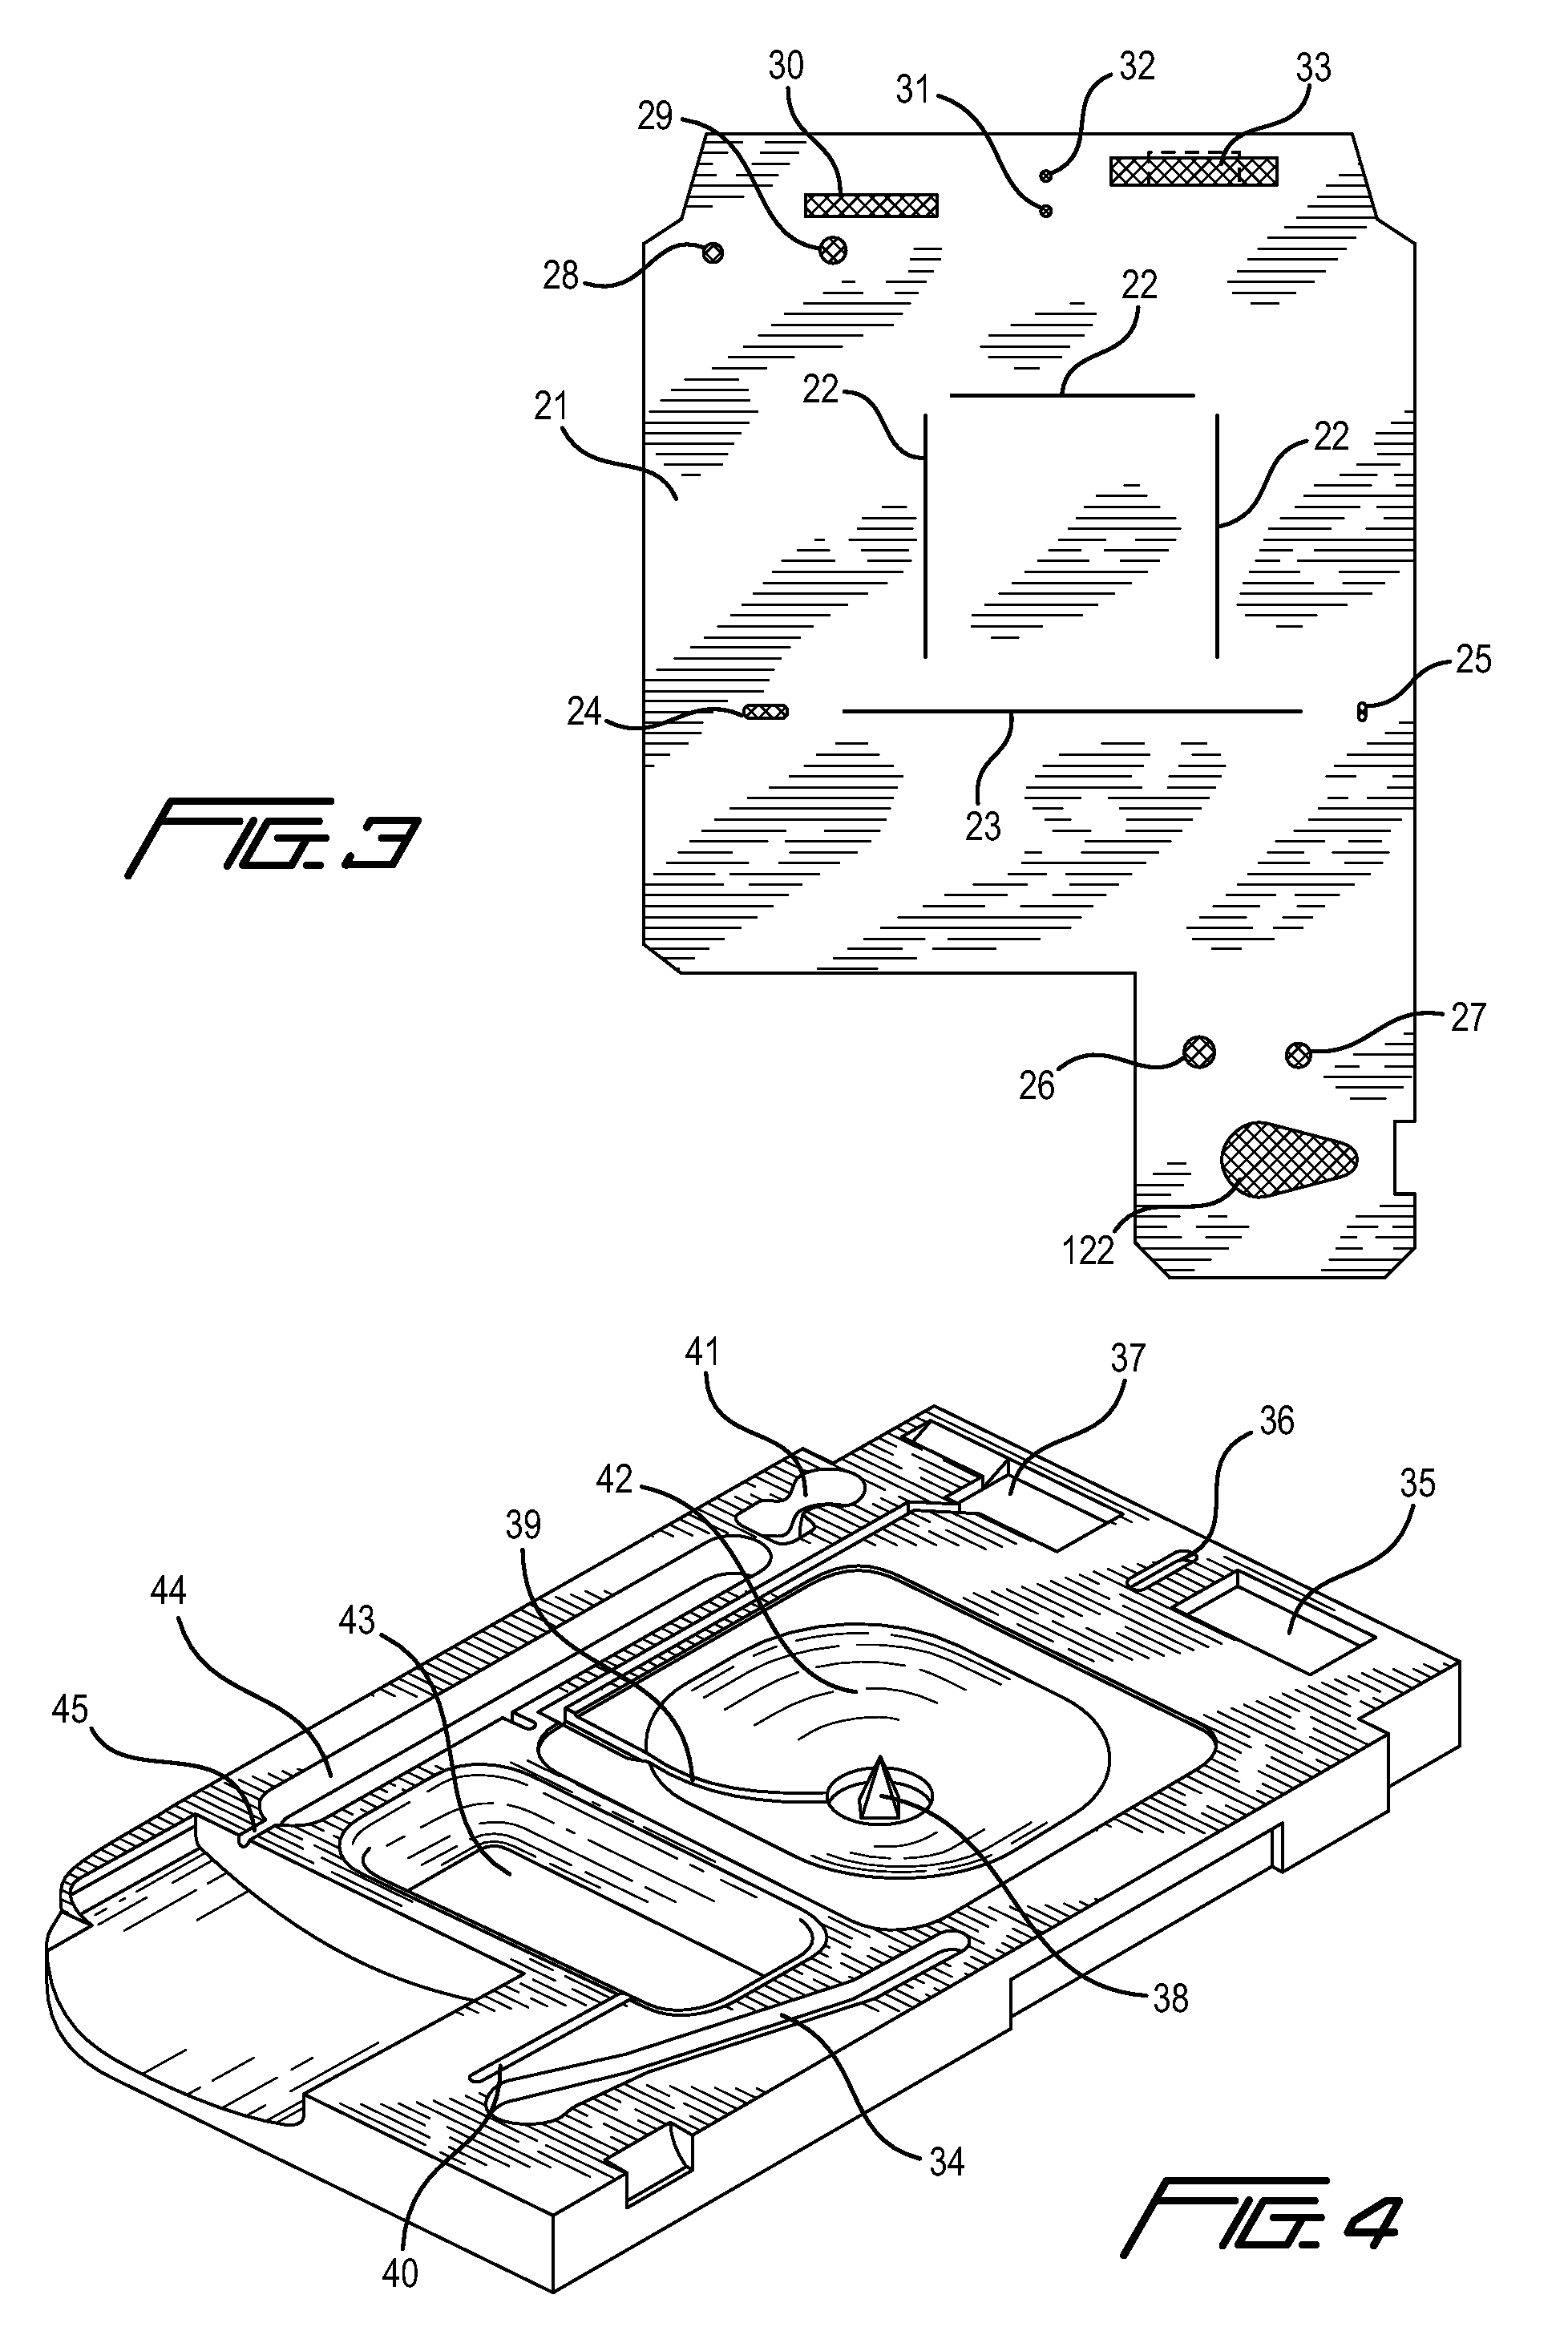 Apparatus and methods for analyte measurement and immunoassay